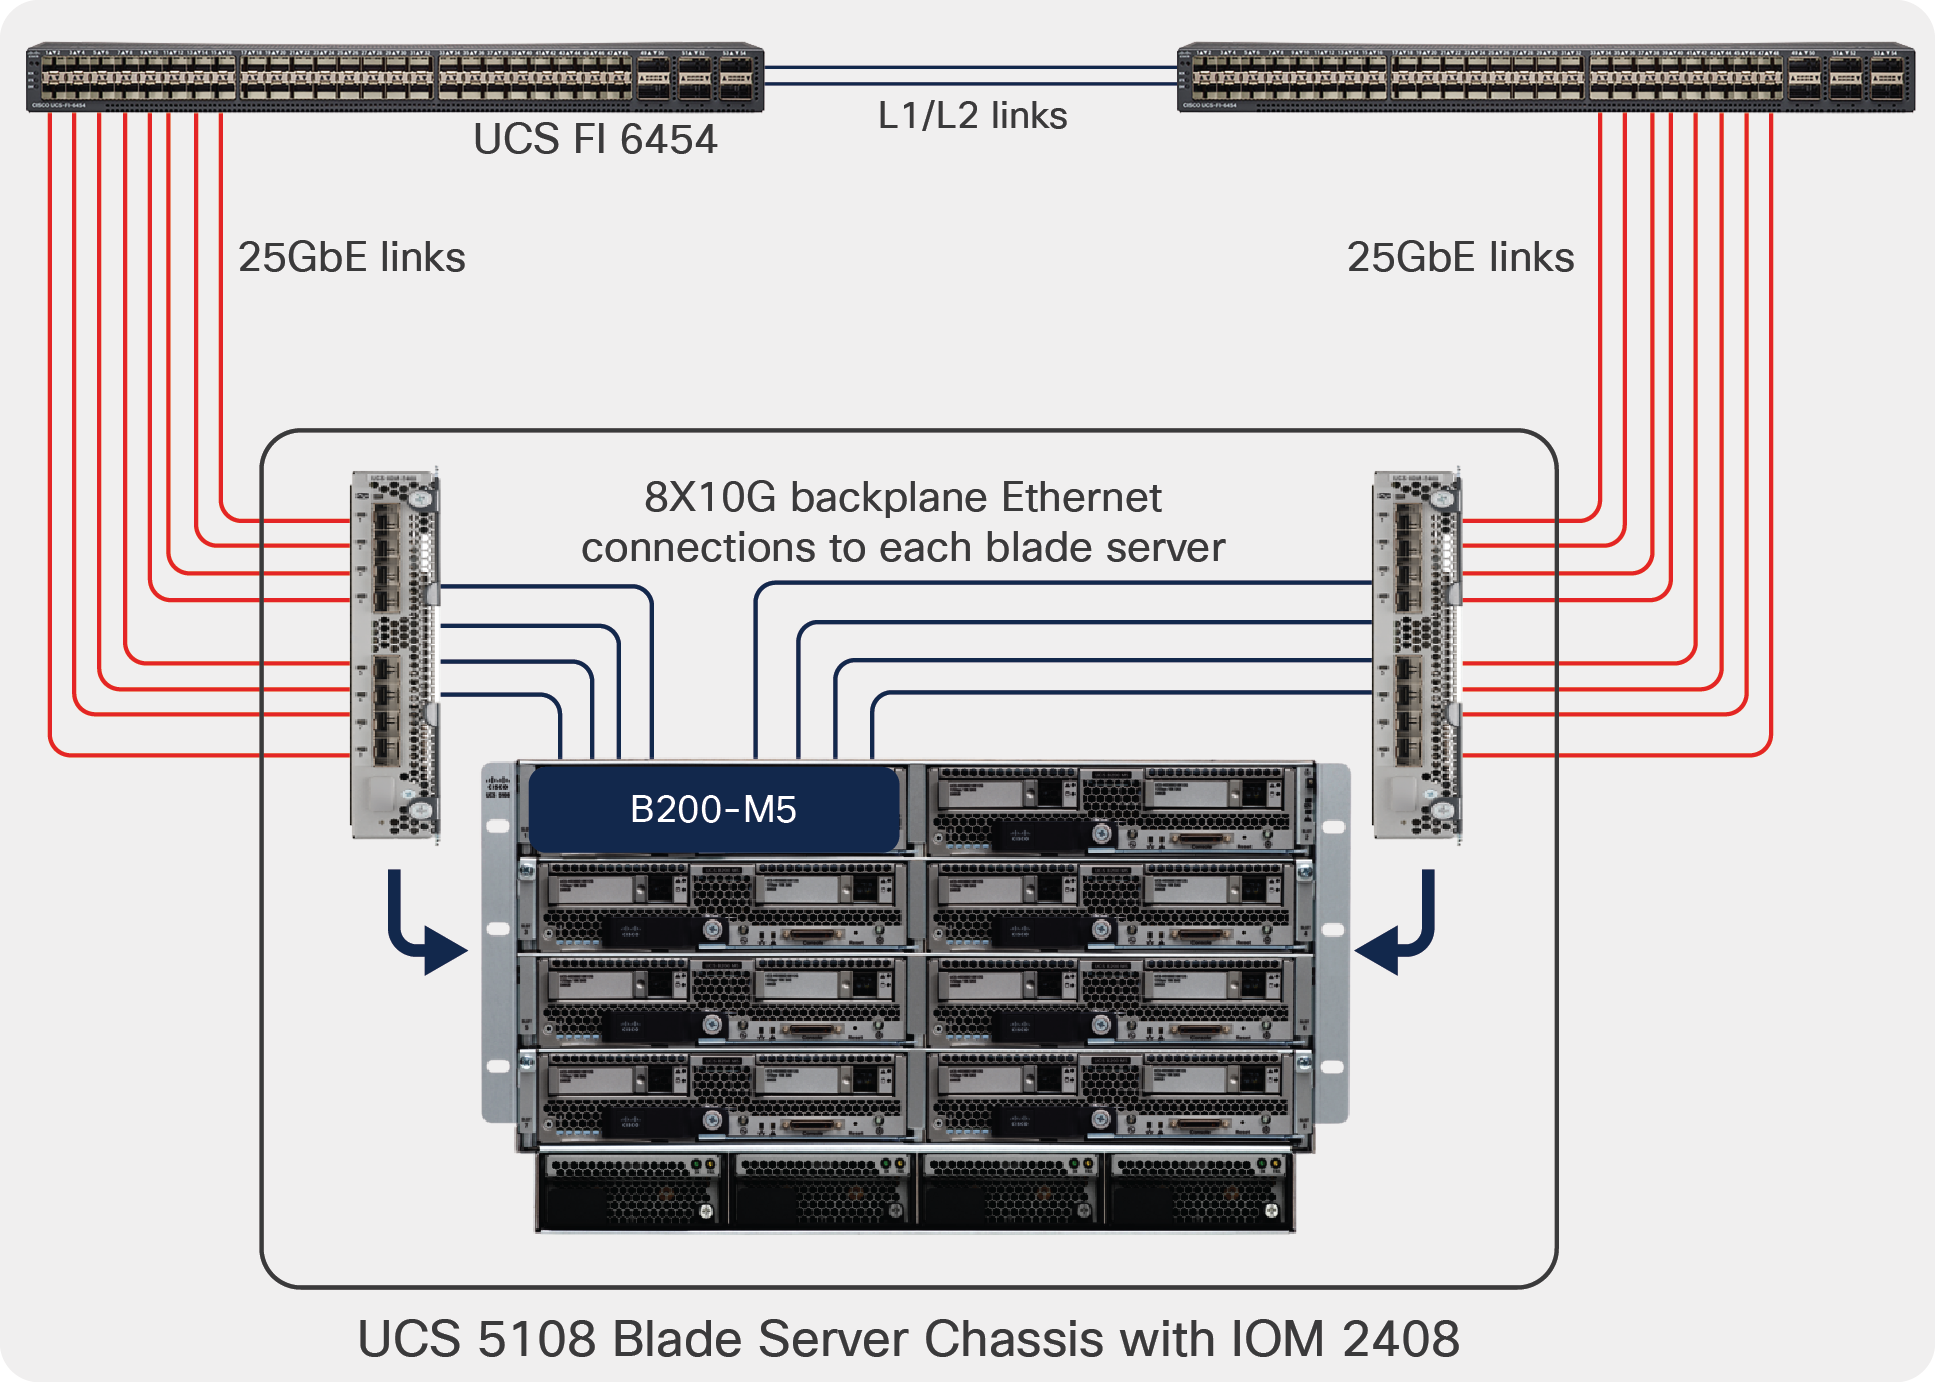 Cisco UCS 5108 chassis with FI 6454 and IOM 2408